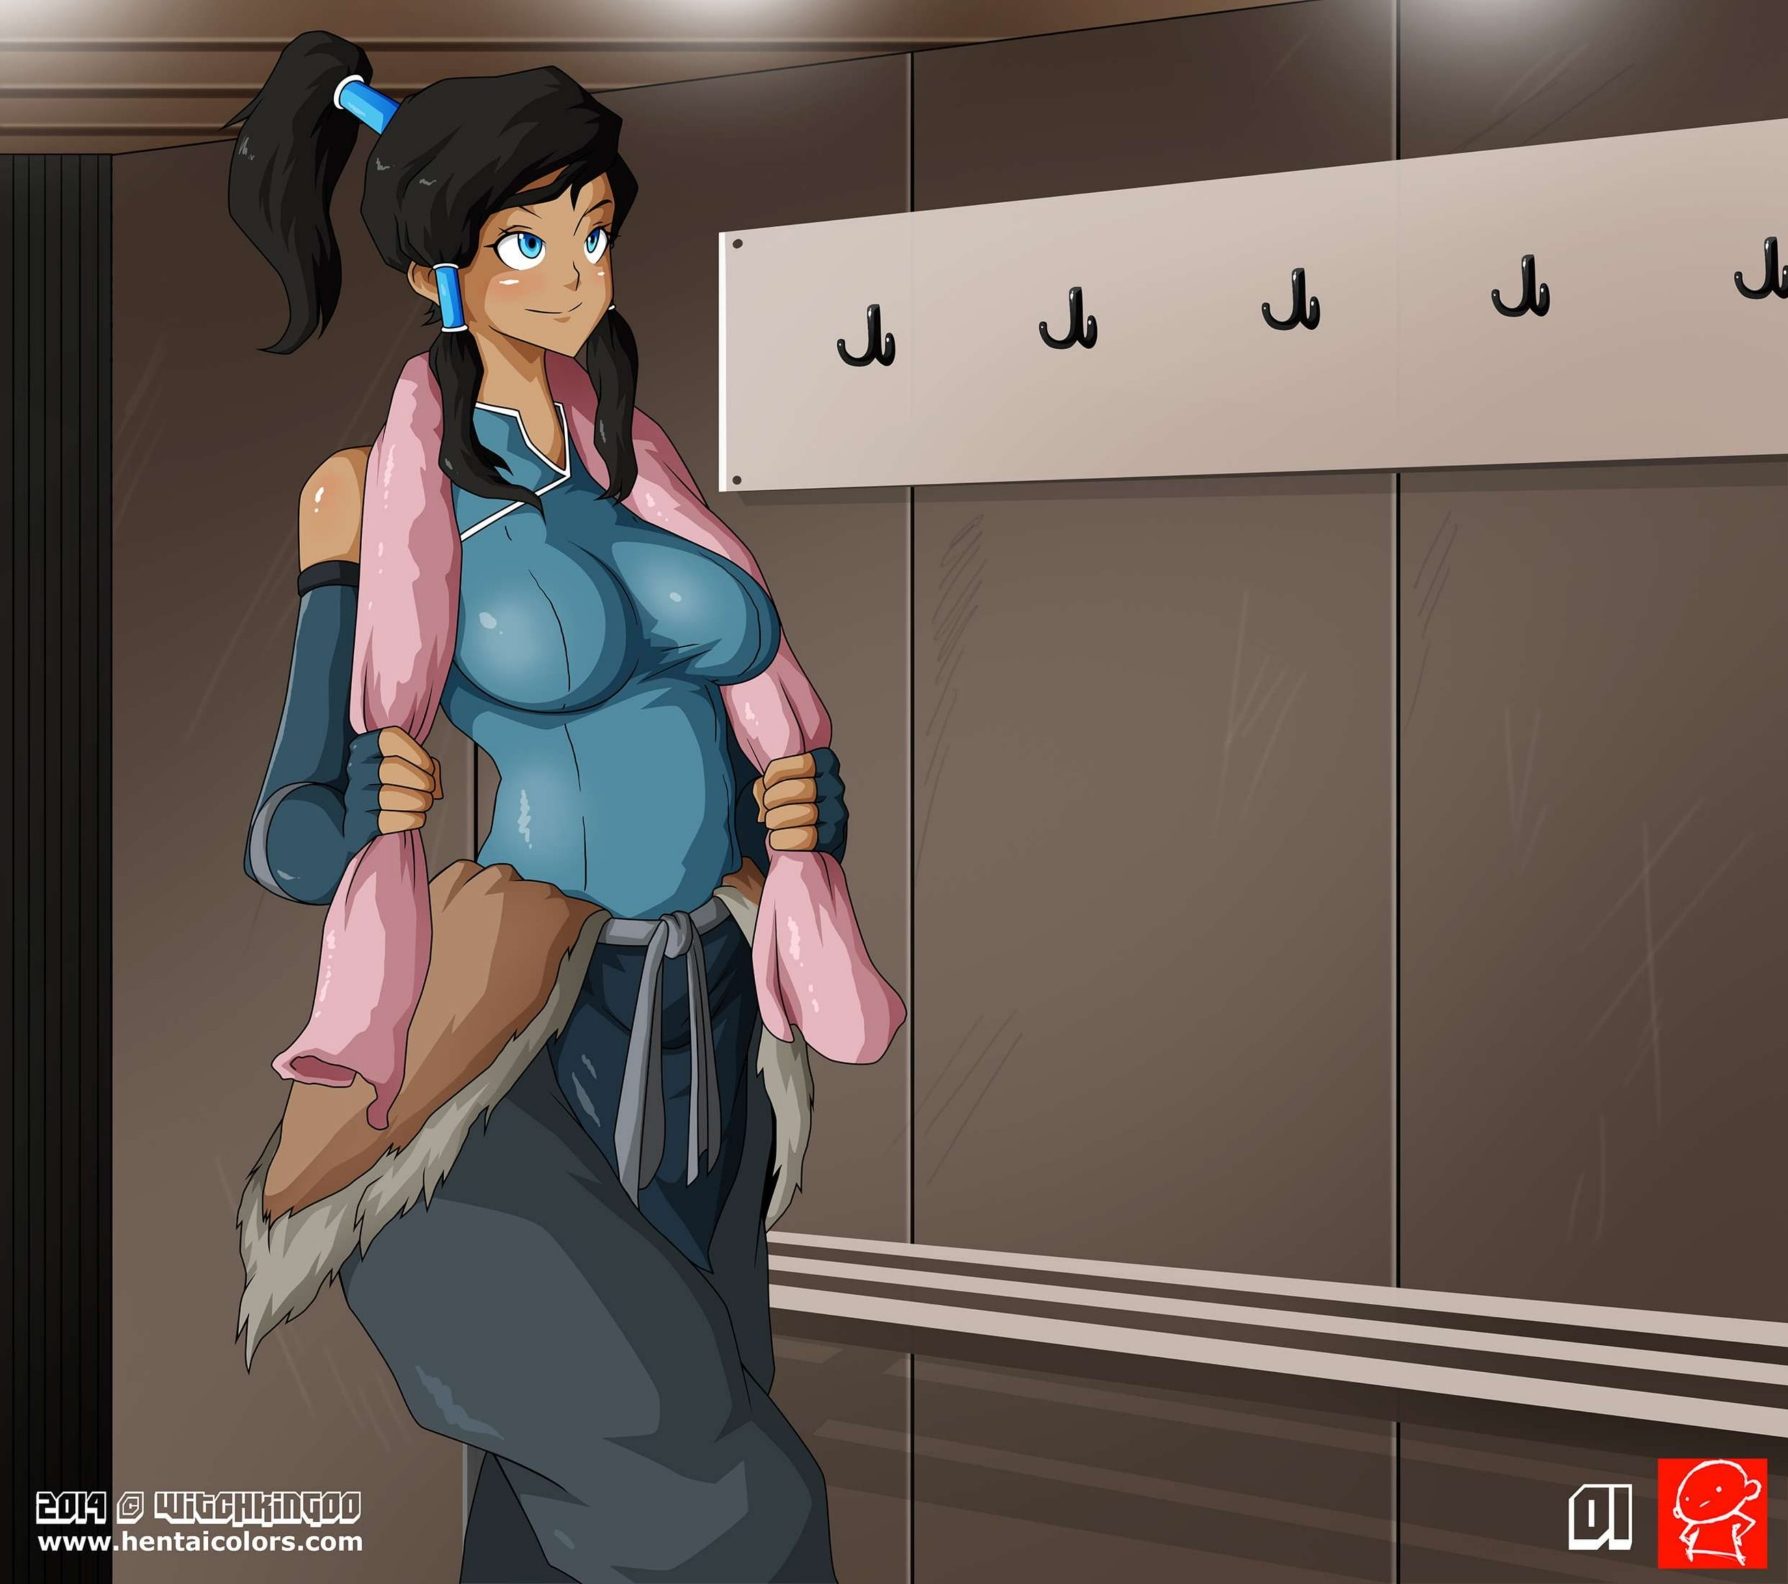 Witch King 00 Korra Avatar Porn Comics - The Legend Of Korra - Shower Time (Witchking00) - FreeAdultComix